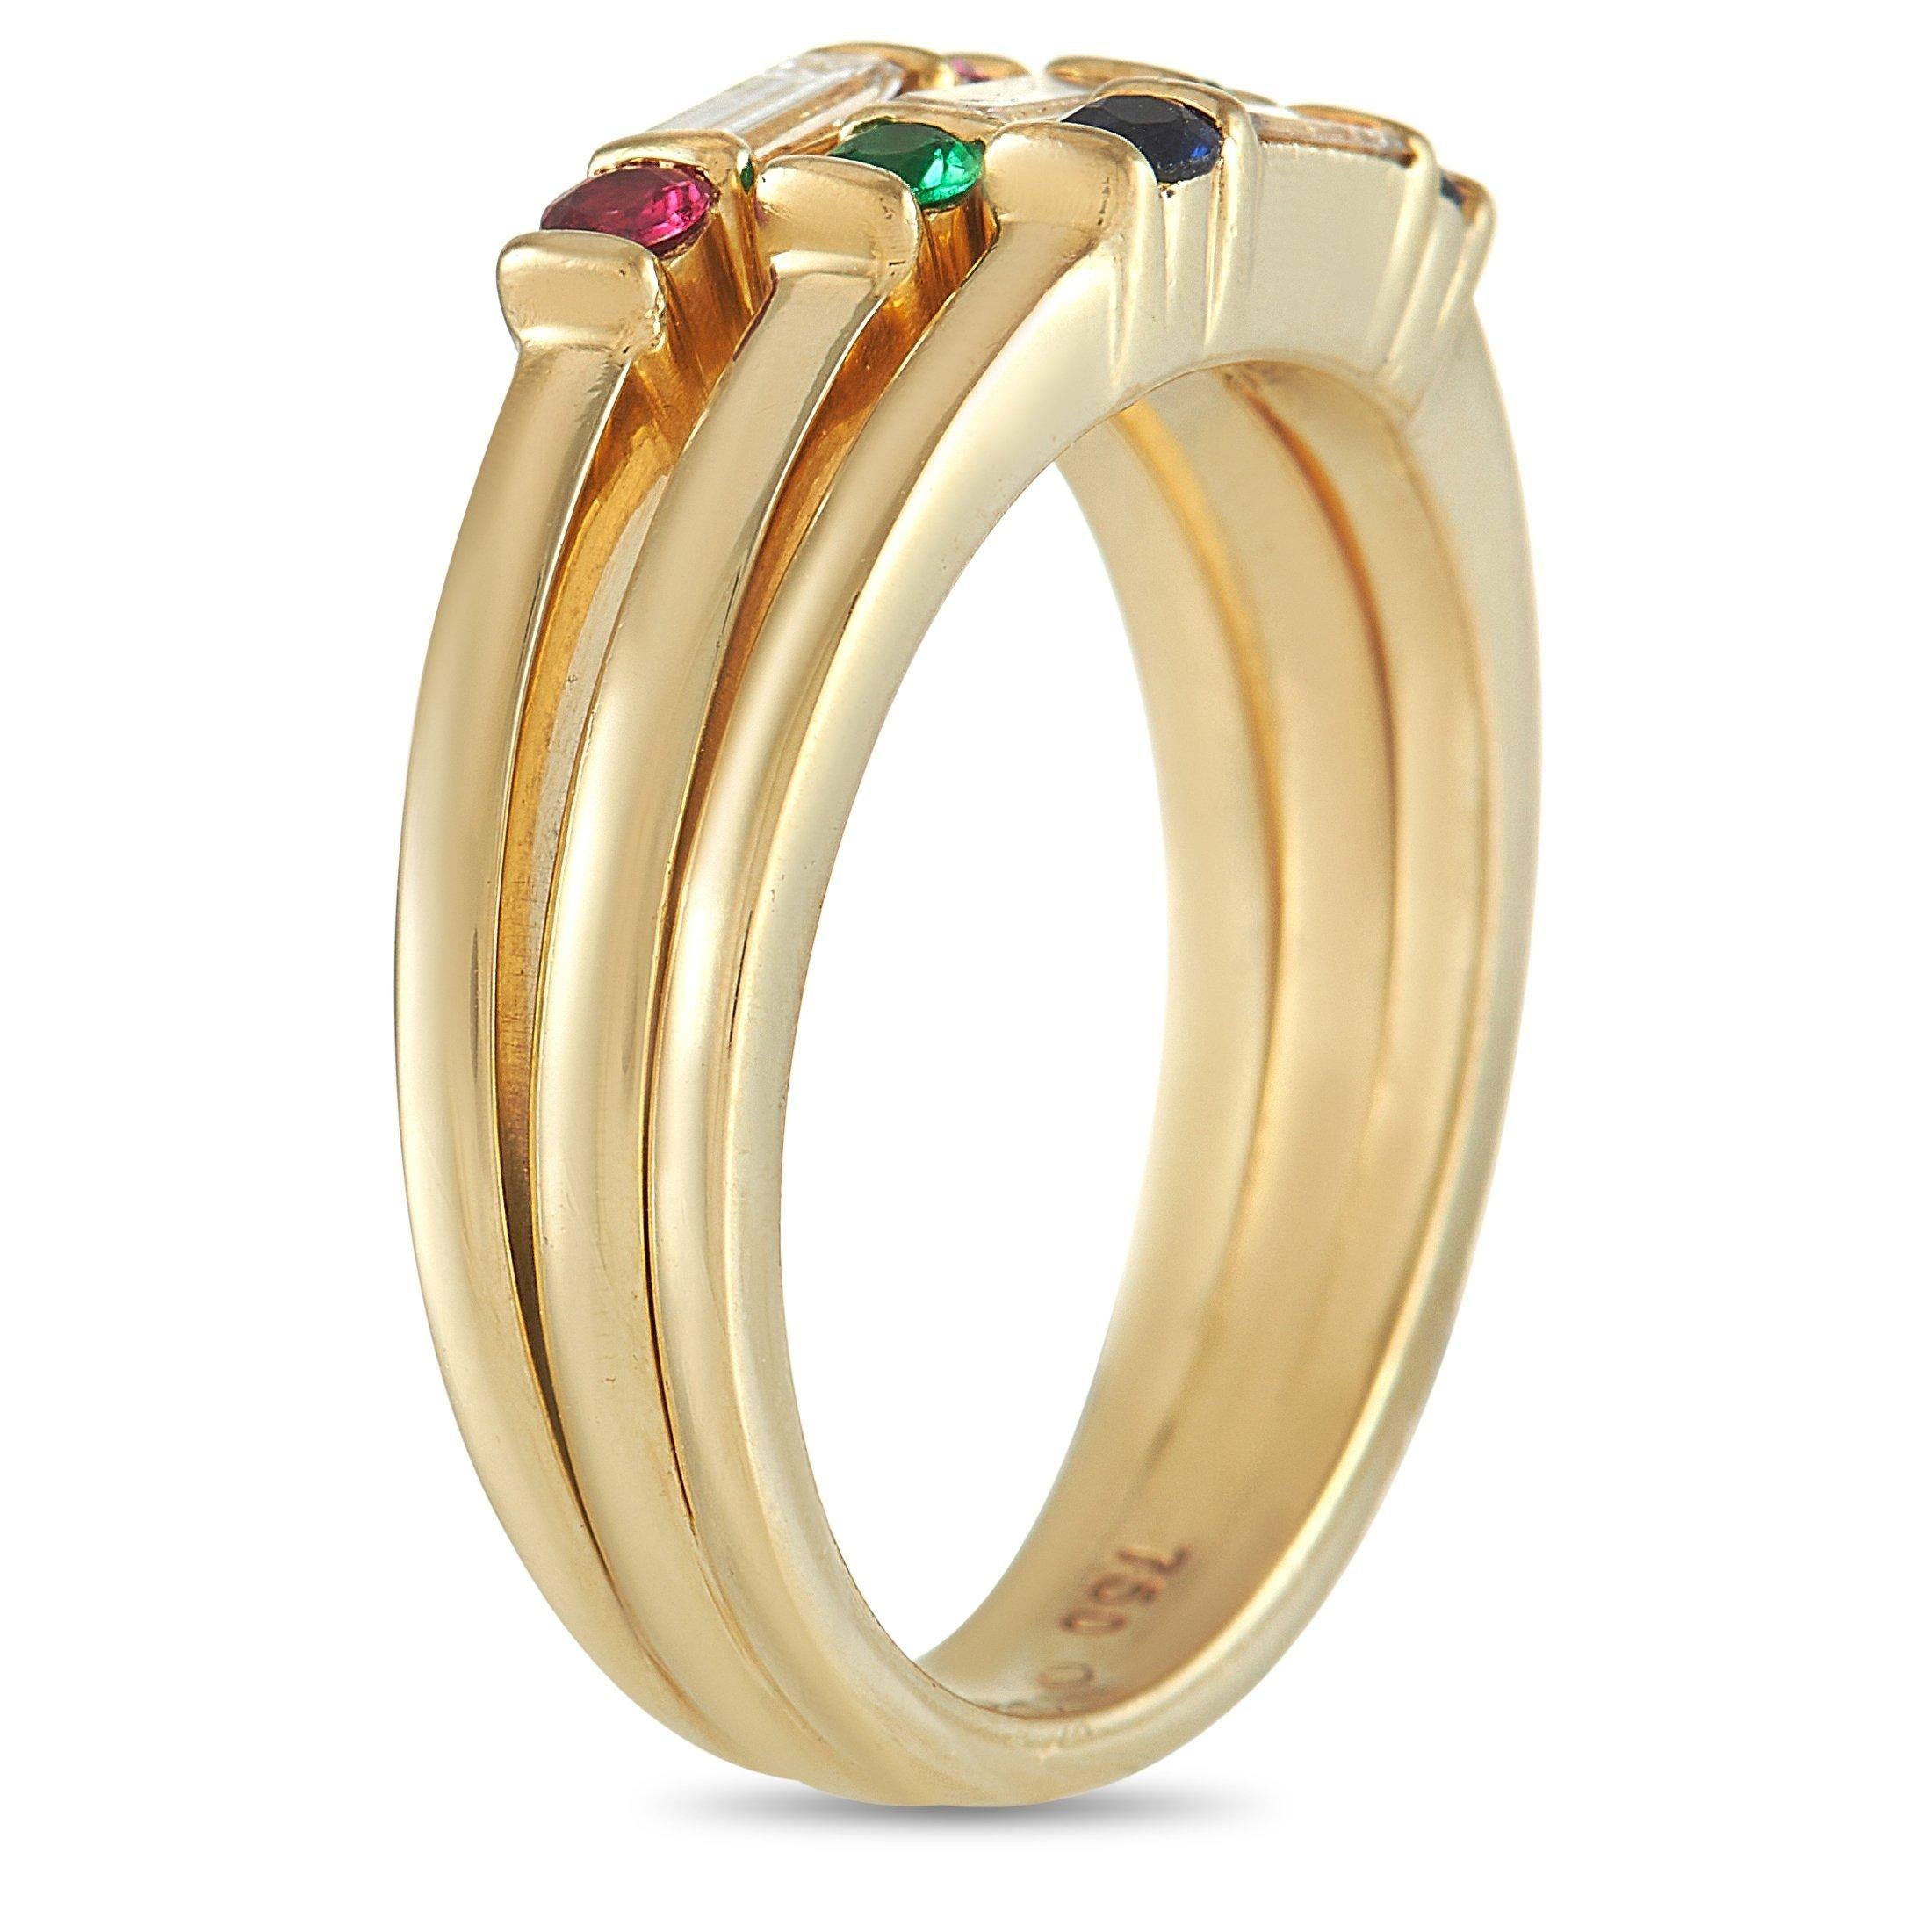 This dynamic design from Tiffany & Co. perfectly combines timeless luxury with uncommon elegance. 18K Yellow Gold provides the perfect background for this charming piece of jewelry, which features a trio of bands. In the center of each band lies a